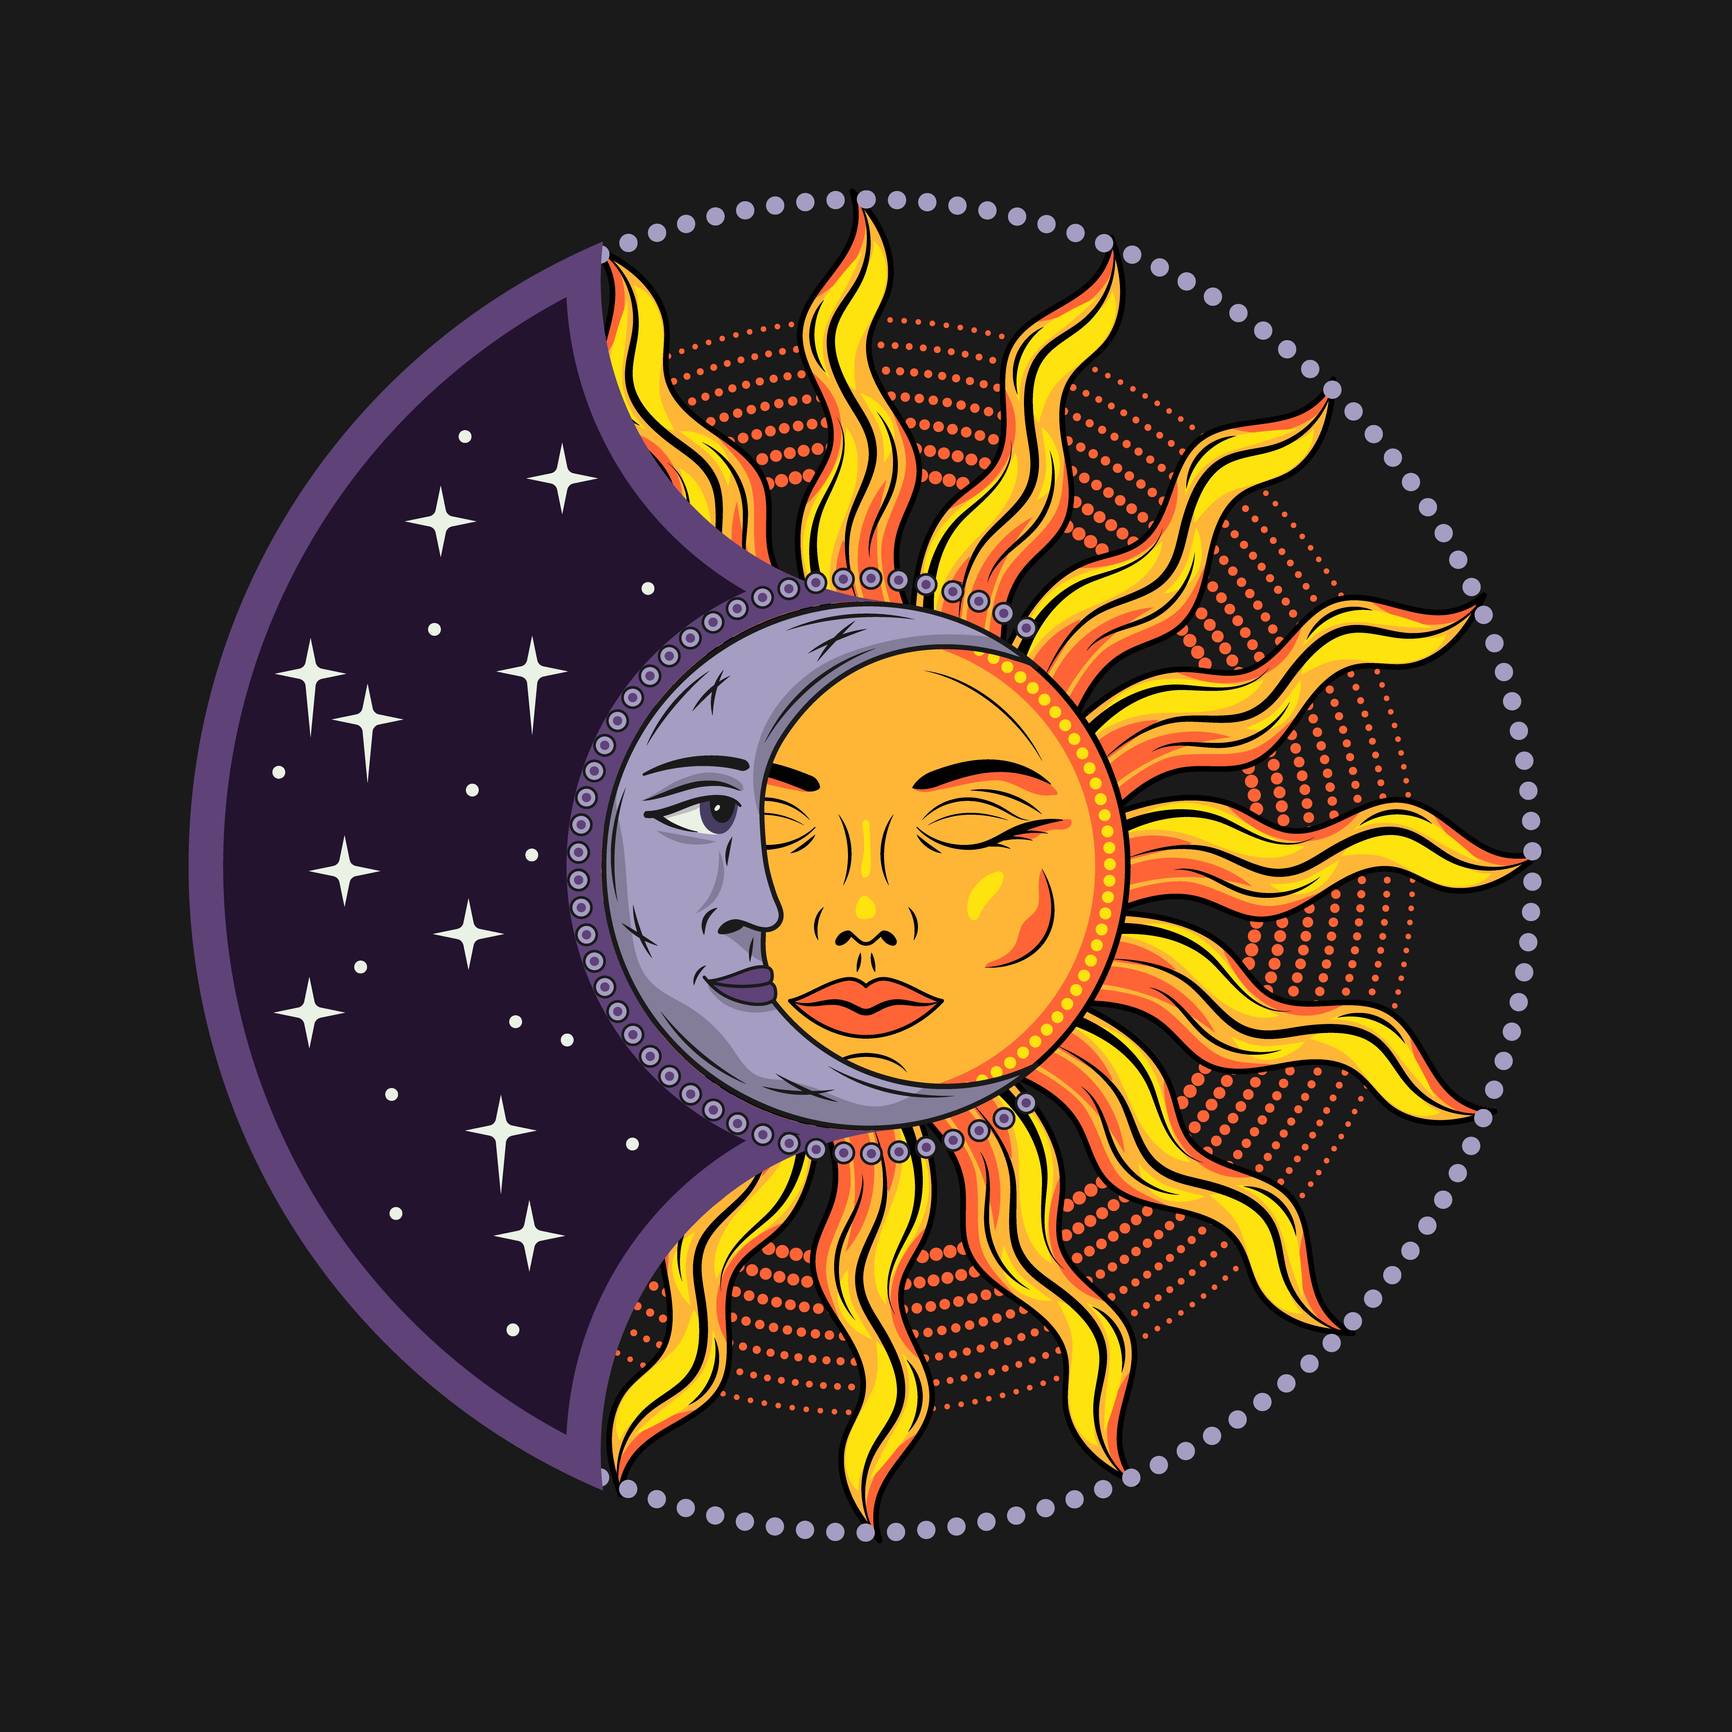 Eclipse with sun, crescent moon